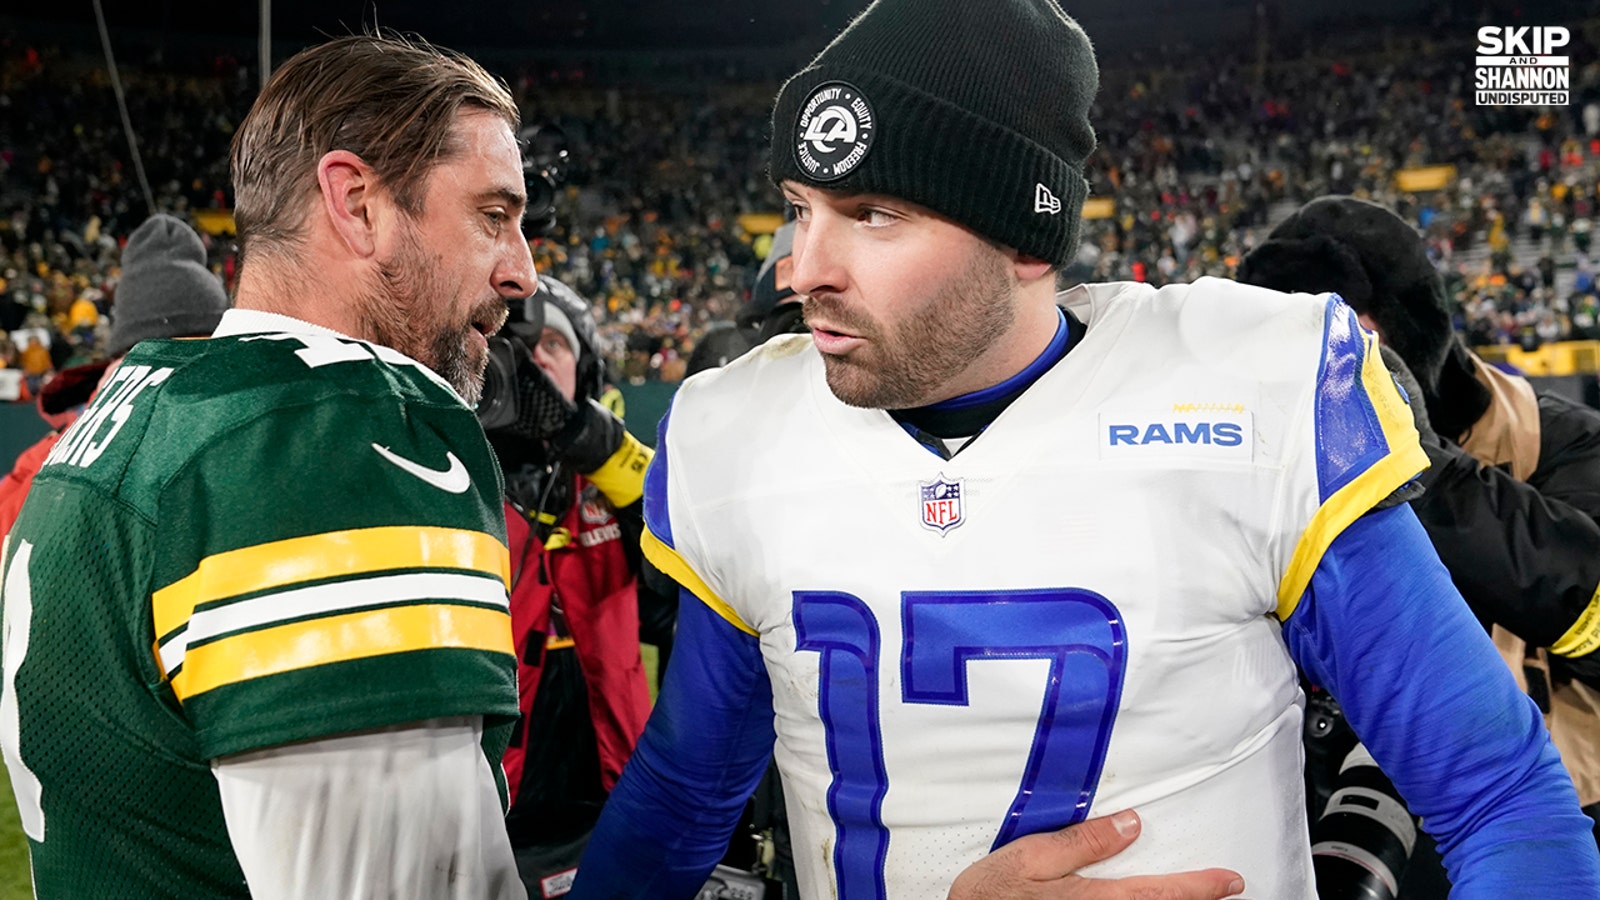 Aaron Rodgers leads MNF win over Baker Mayfield, Rams